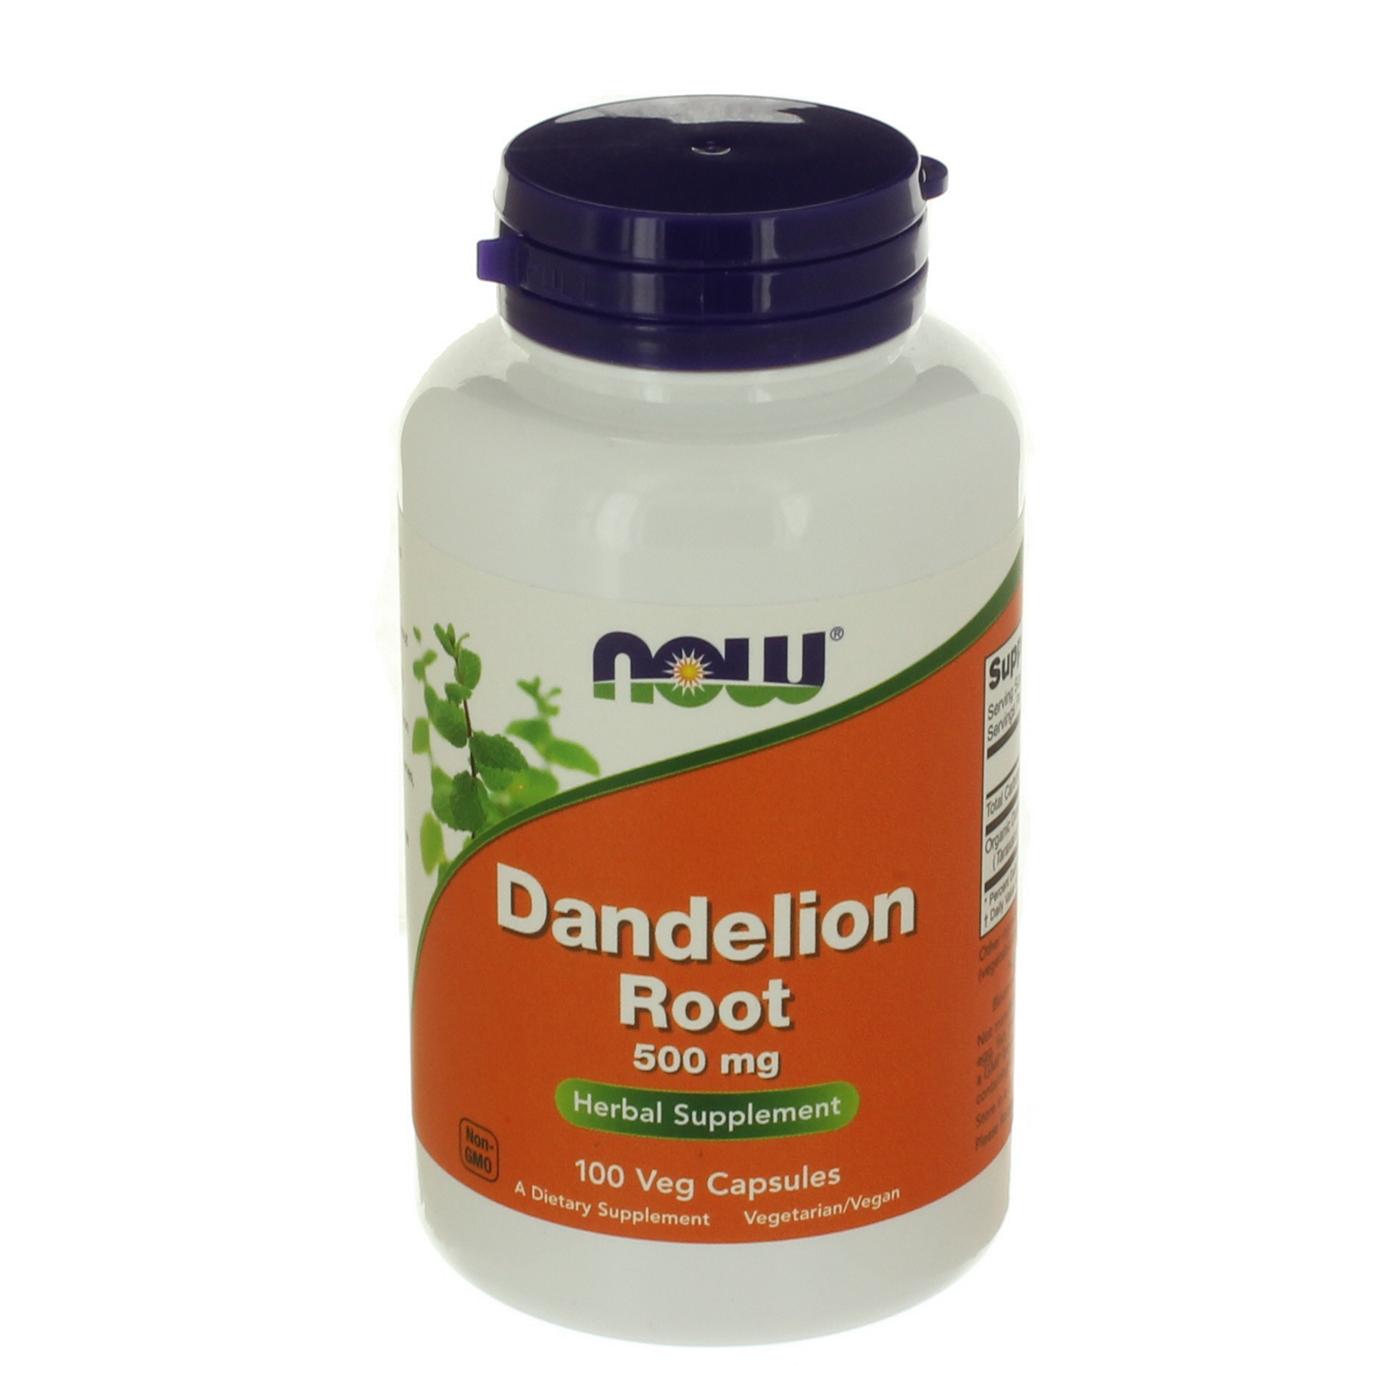 NOW Dandelion Root 500 mg Capsules; image 1 of 2